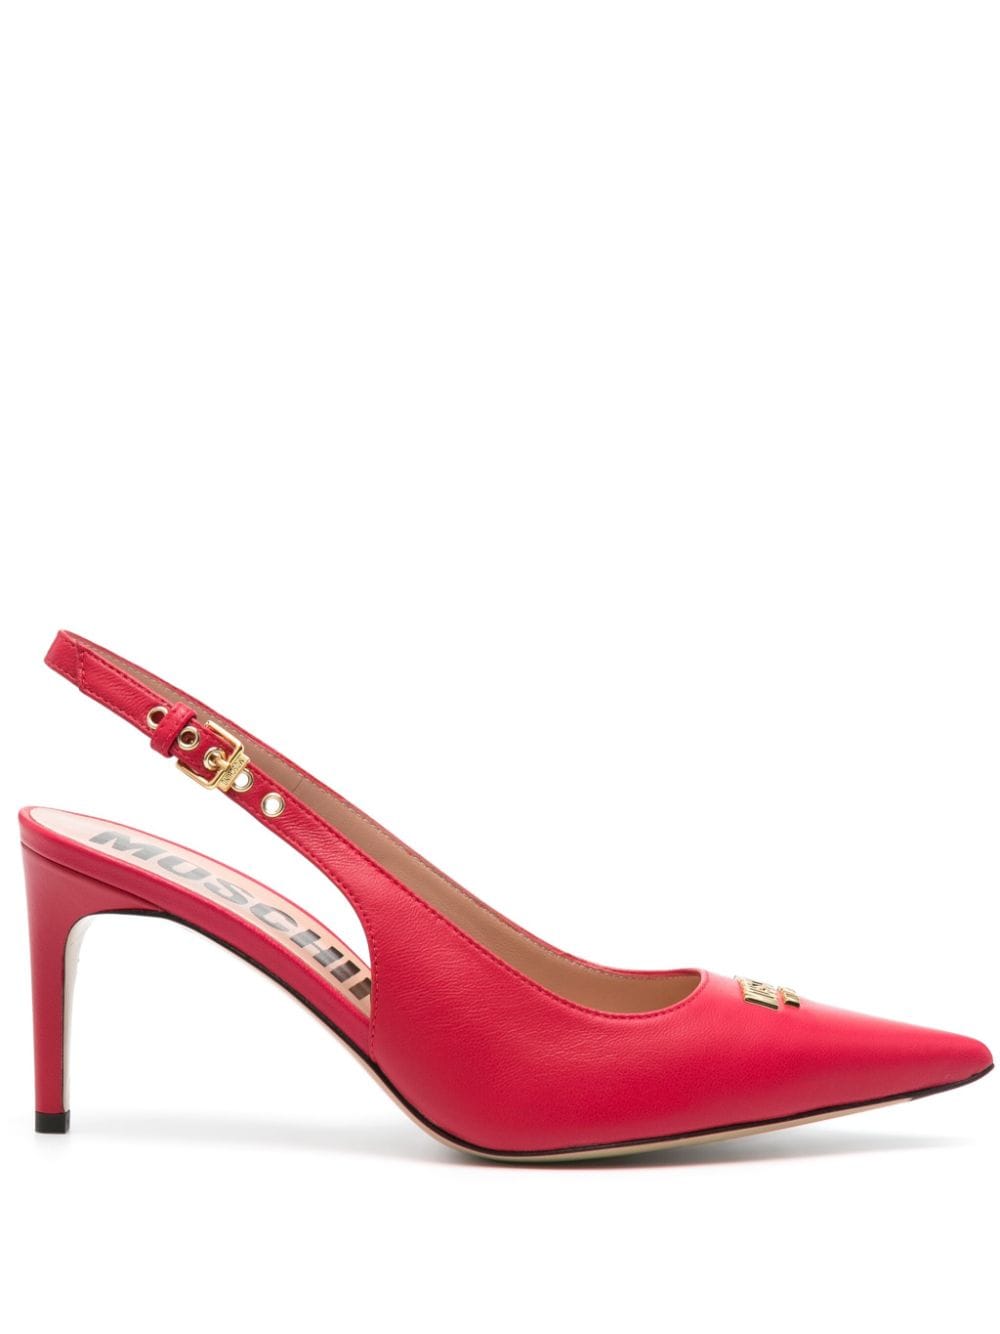 Moschino 75mm slingback leather pumps - Red von Moschino